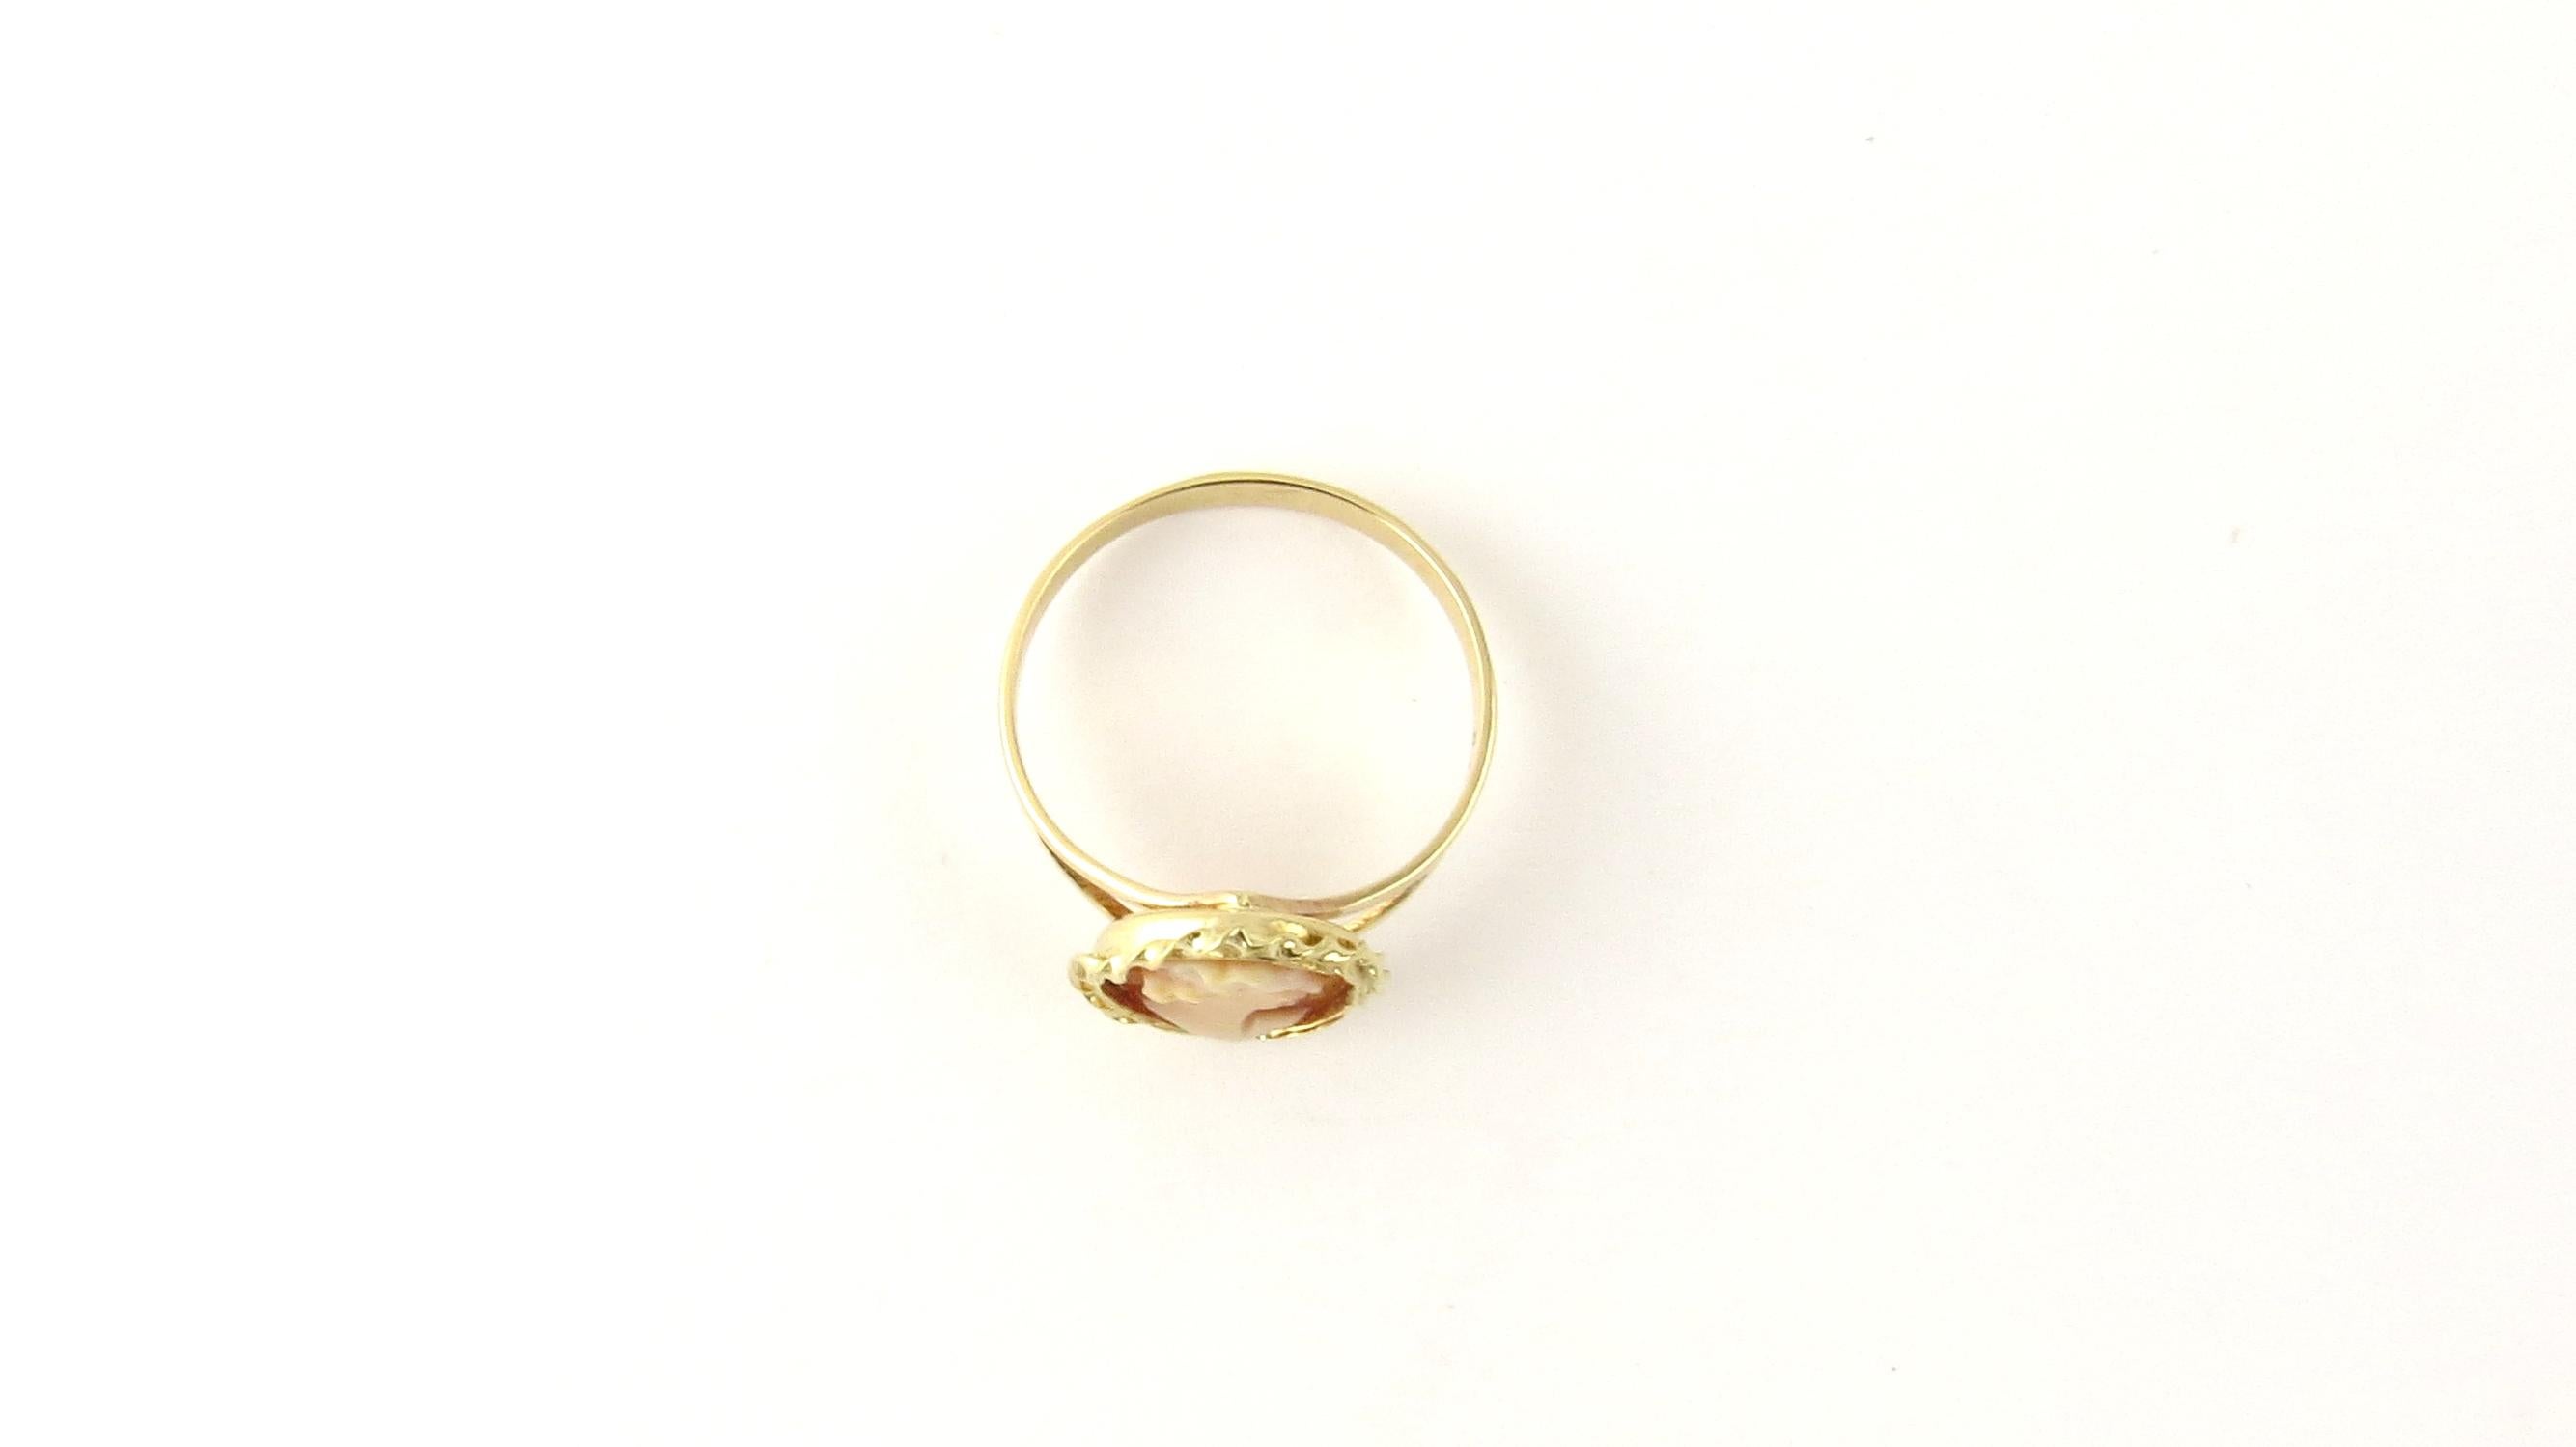 Vintage 14 Karat Yellow Gold Cameo Ring Size 4.75

This lovely cameo ring features lovely lady in profile framed in beautifully detailed 14K yellow gold. Cameo measures 12 mm x 11 mm. Shank measures 2 mm.

Ring Size: 4.75

Weight: 0.7 dwt. / 1.2